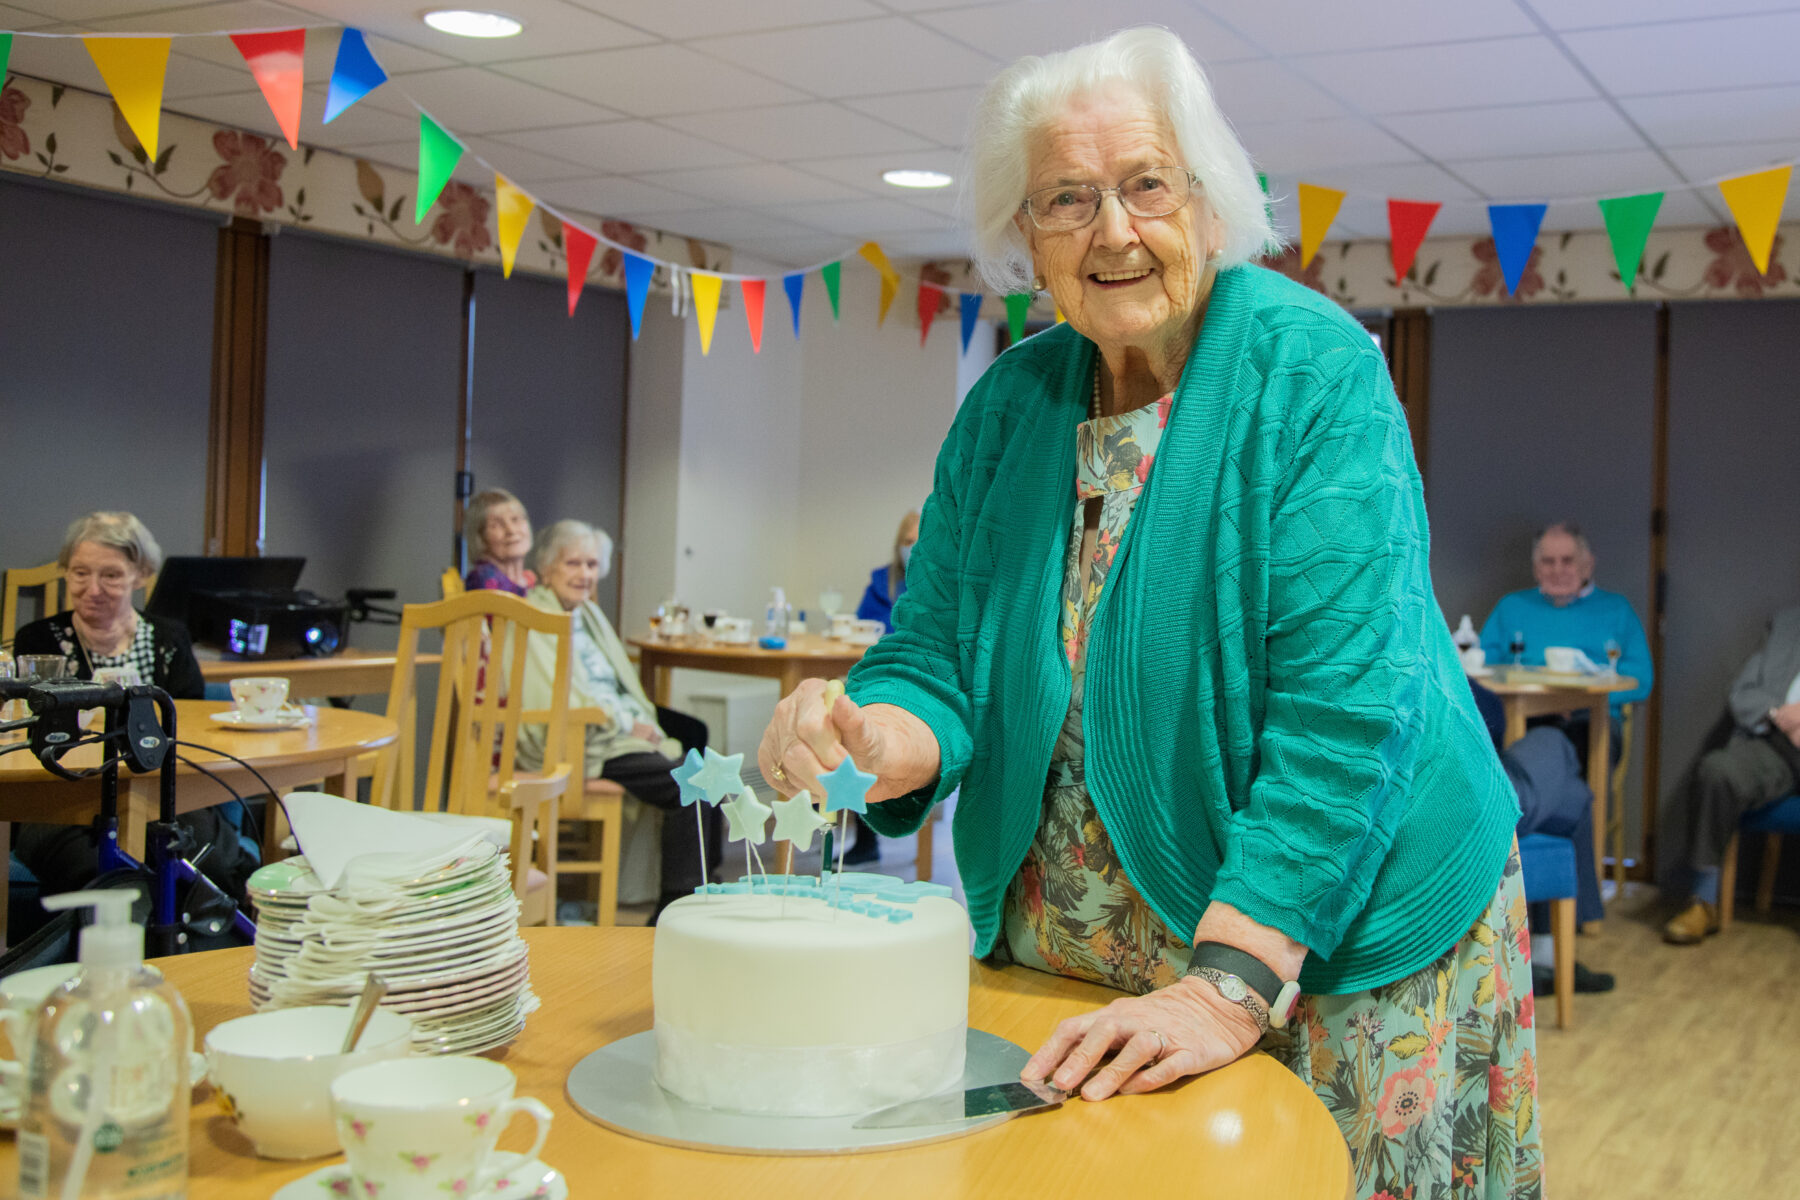 One of the Llys Awelon residents cutting a celebration cake